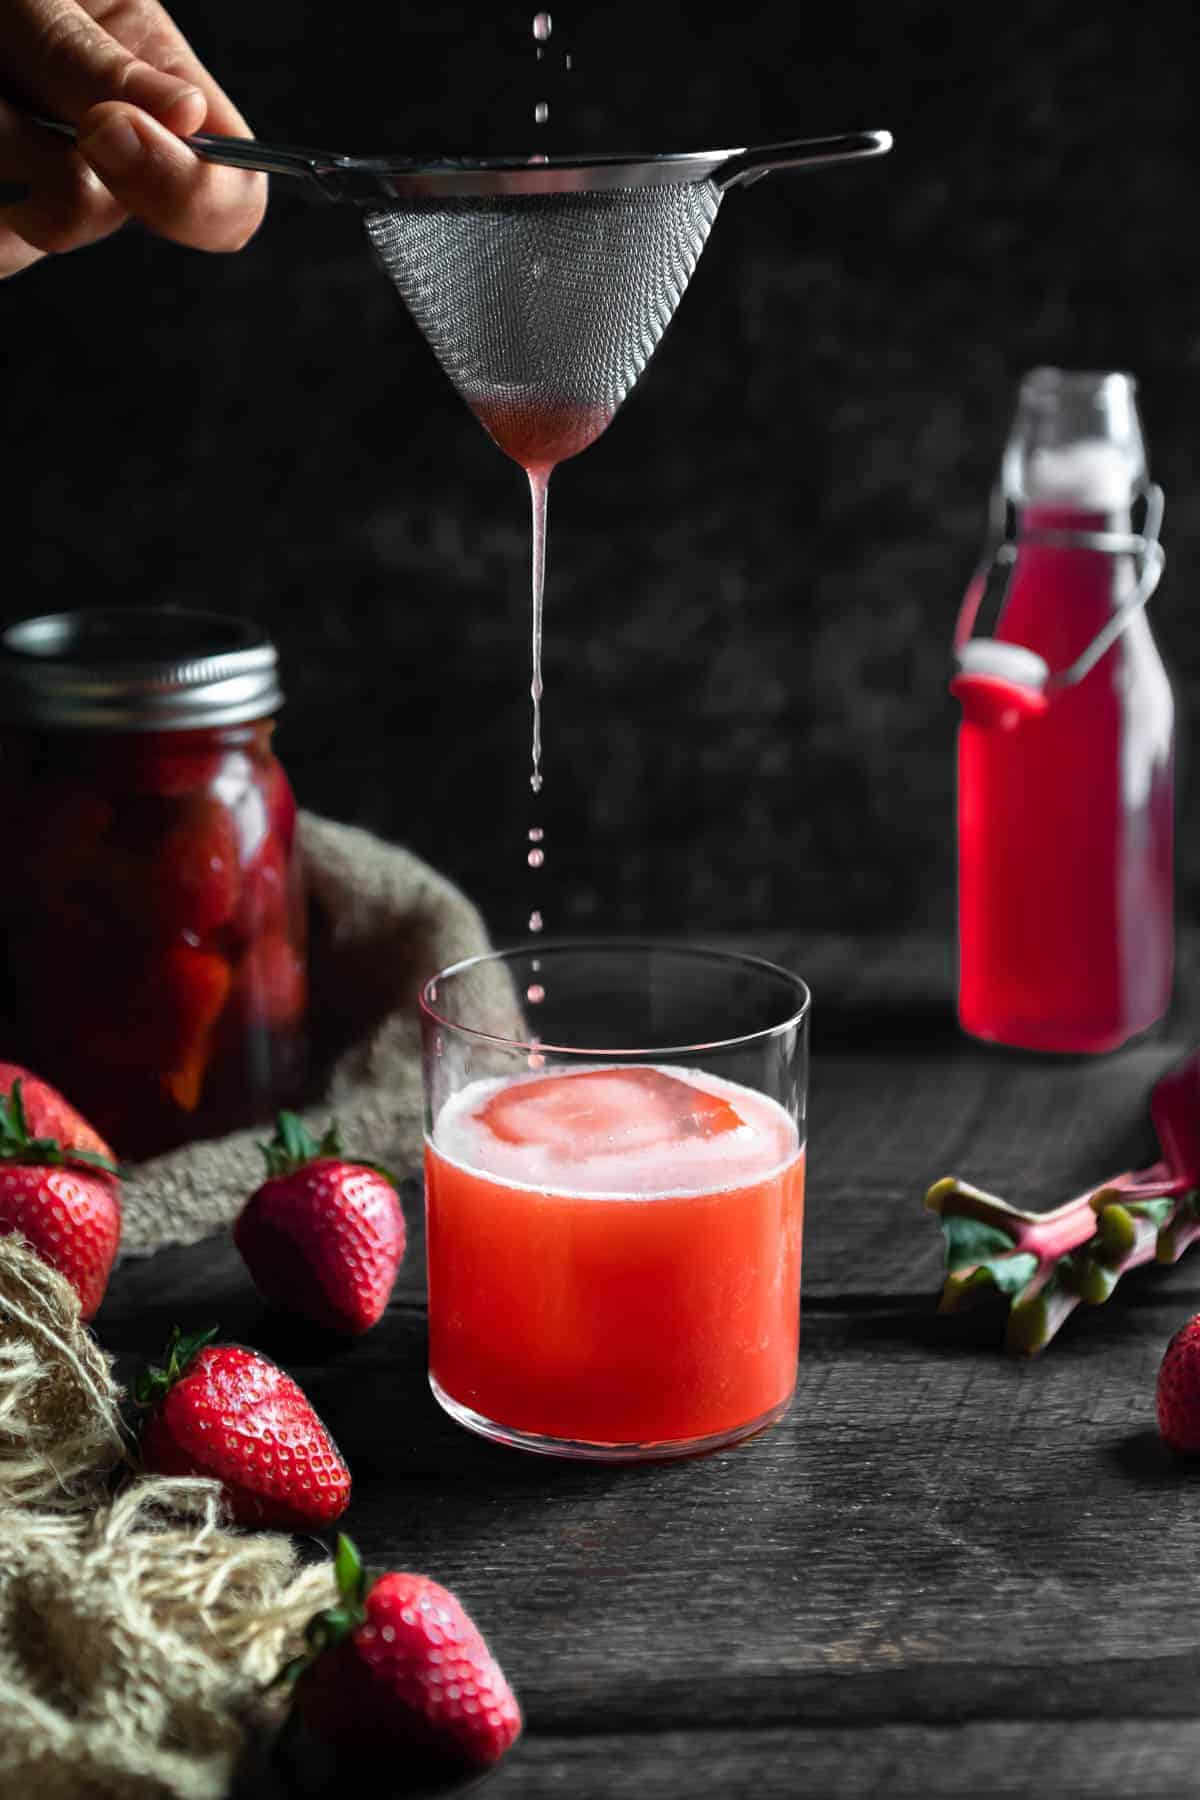 The last drops of a Strawberry Rhubarb Whiskey Sour being poured through a tea strainer into a rocks glass. A jar of strawberry infused whiskey with a burlap cloth, fresh strawberries and a bottle of rhubarb syrup are in the background.